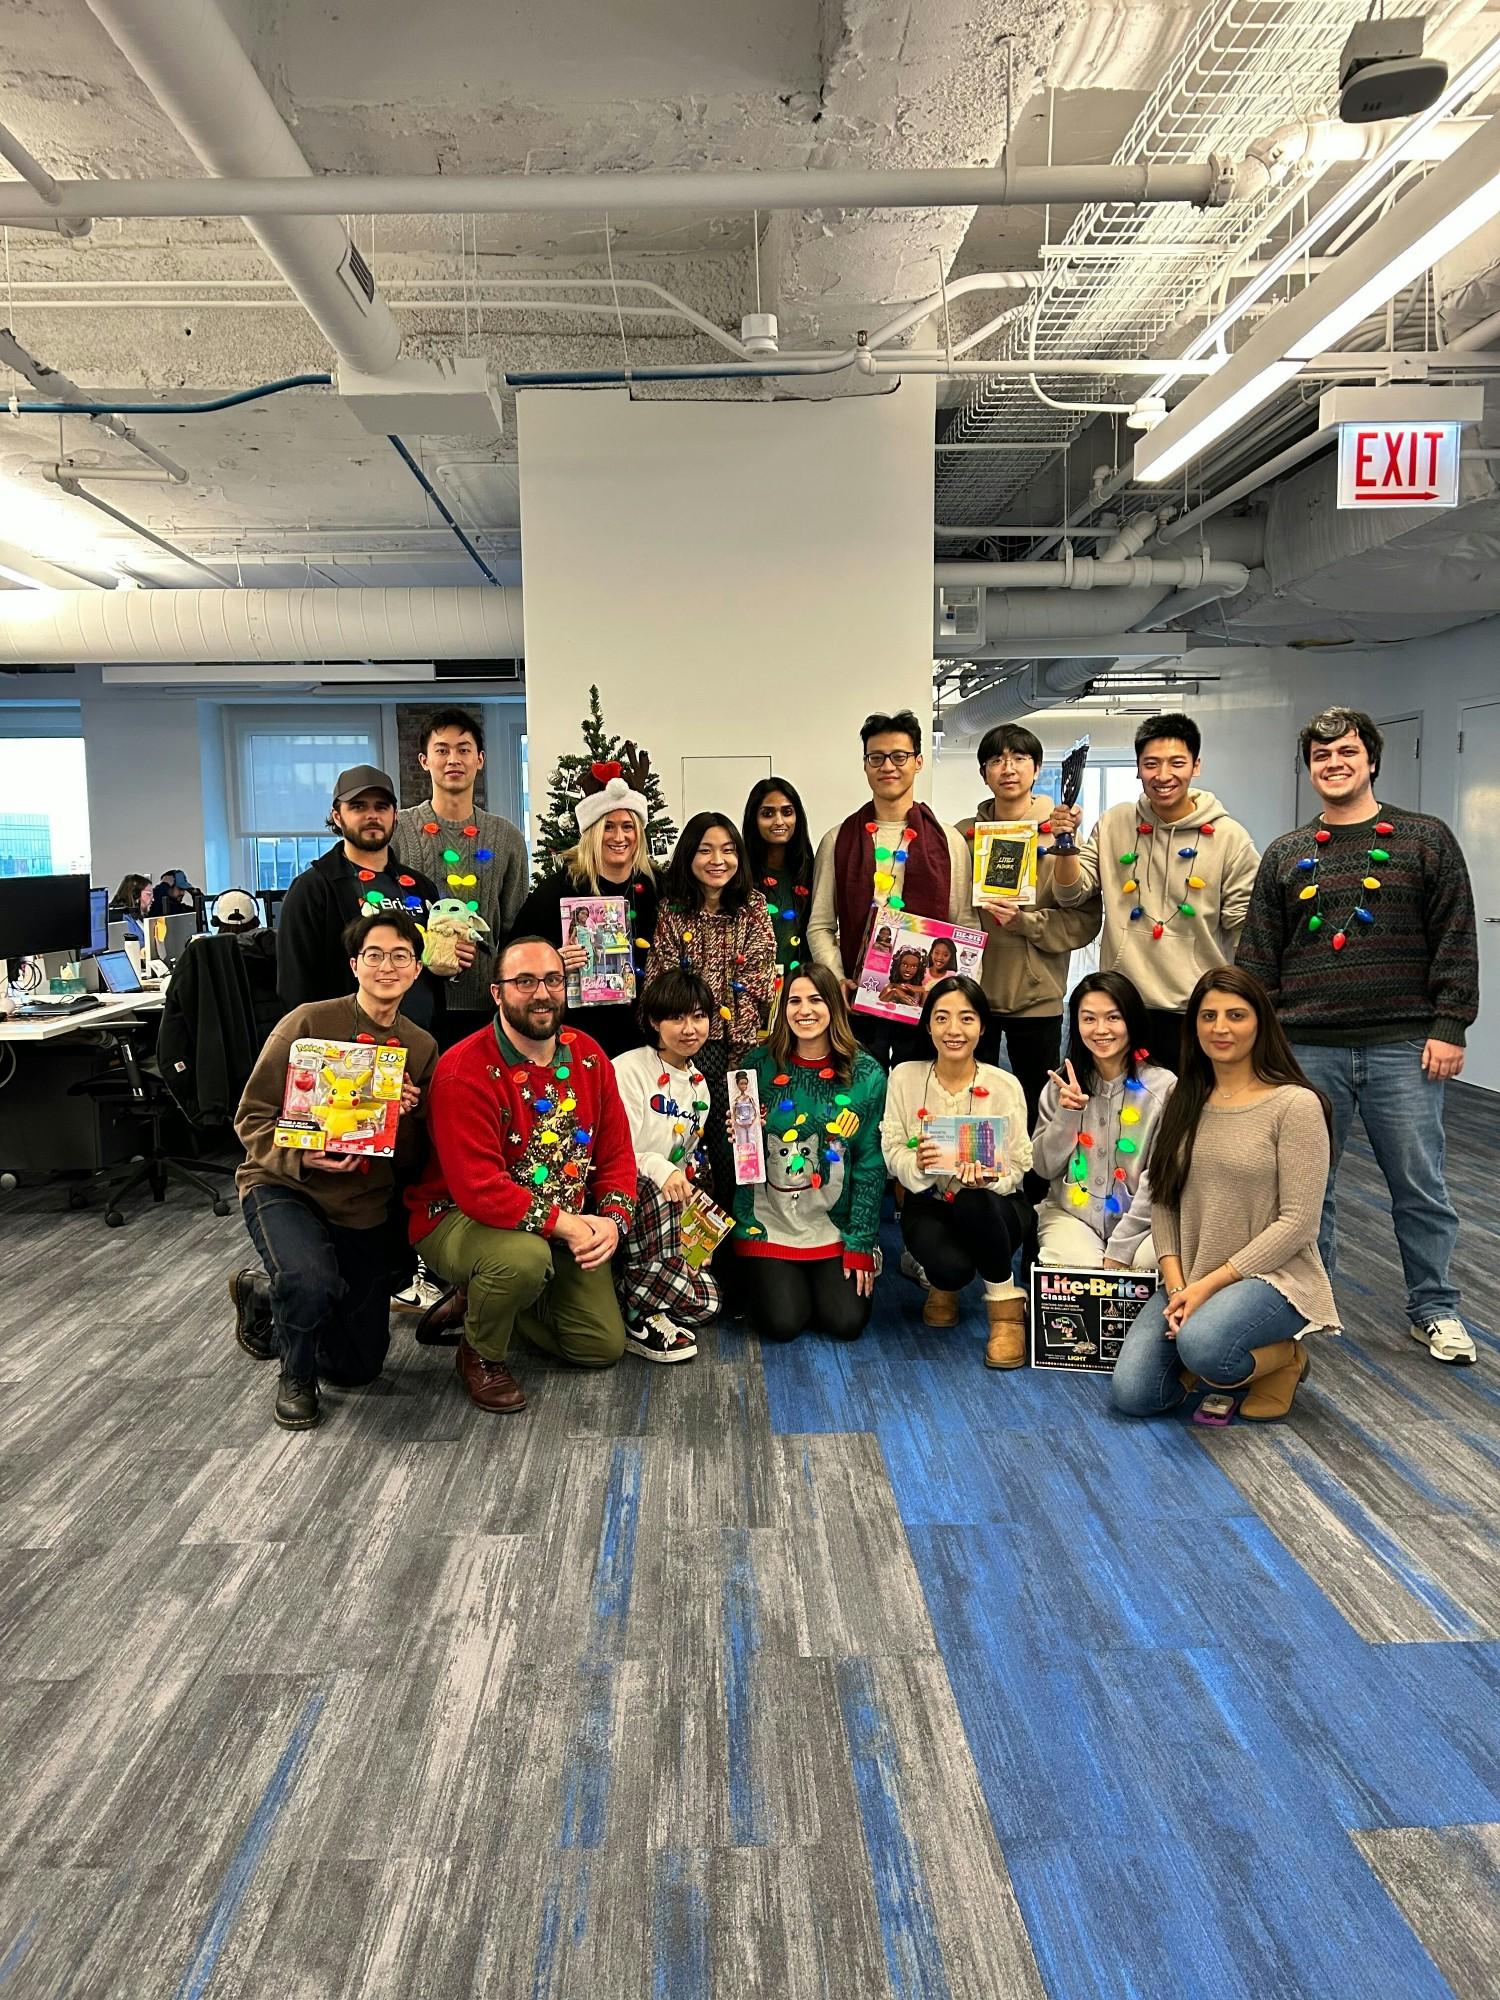 Our team in the holiday spirit during our holiday toy drive.